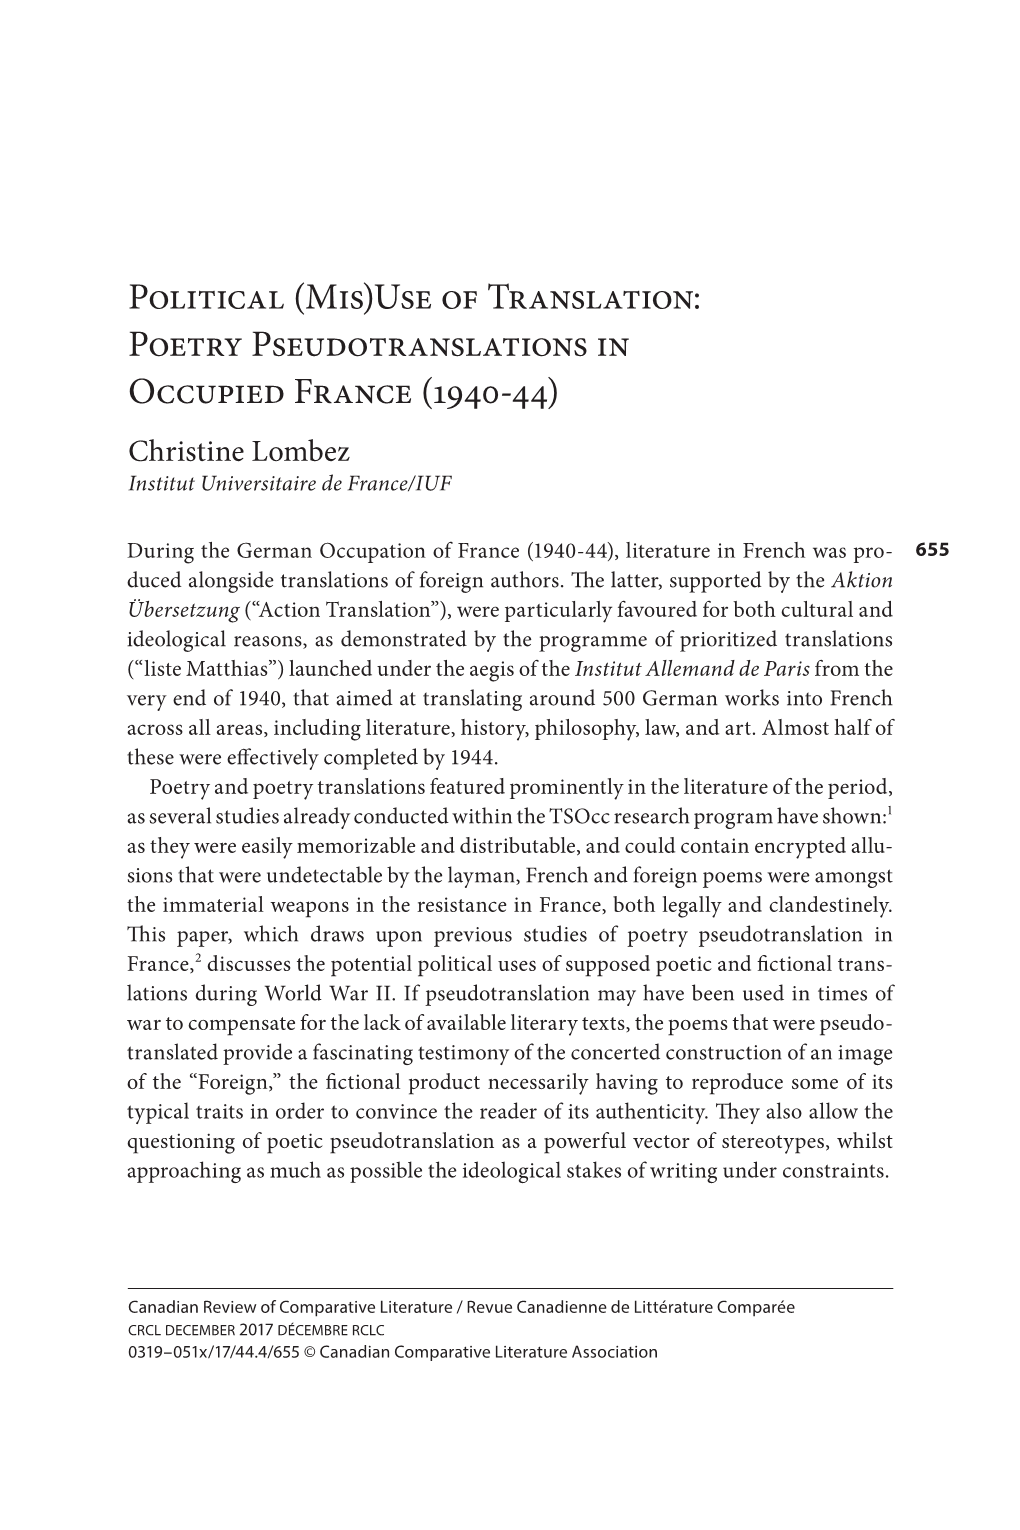 Use of Translation: Poetry Pseudotranslations in Occupied France (1940-44) Christine Lombez Institut Universitaire De France/IUF